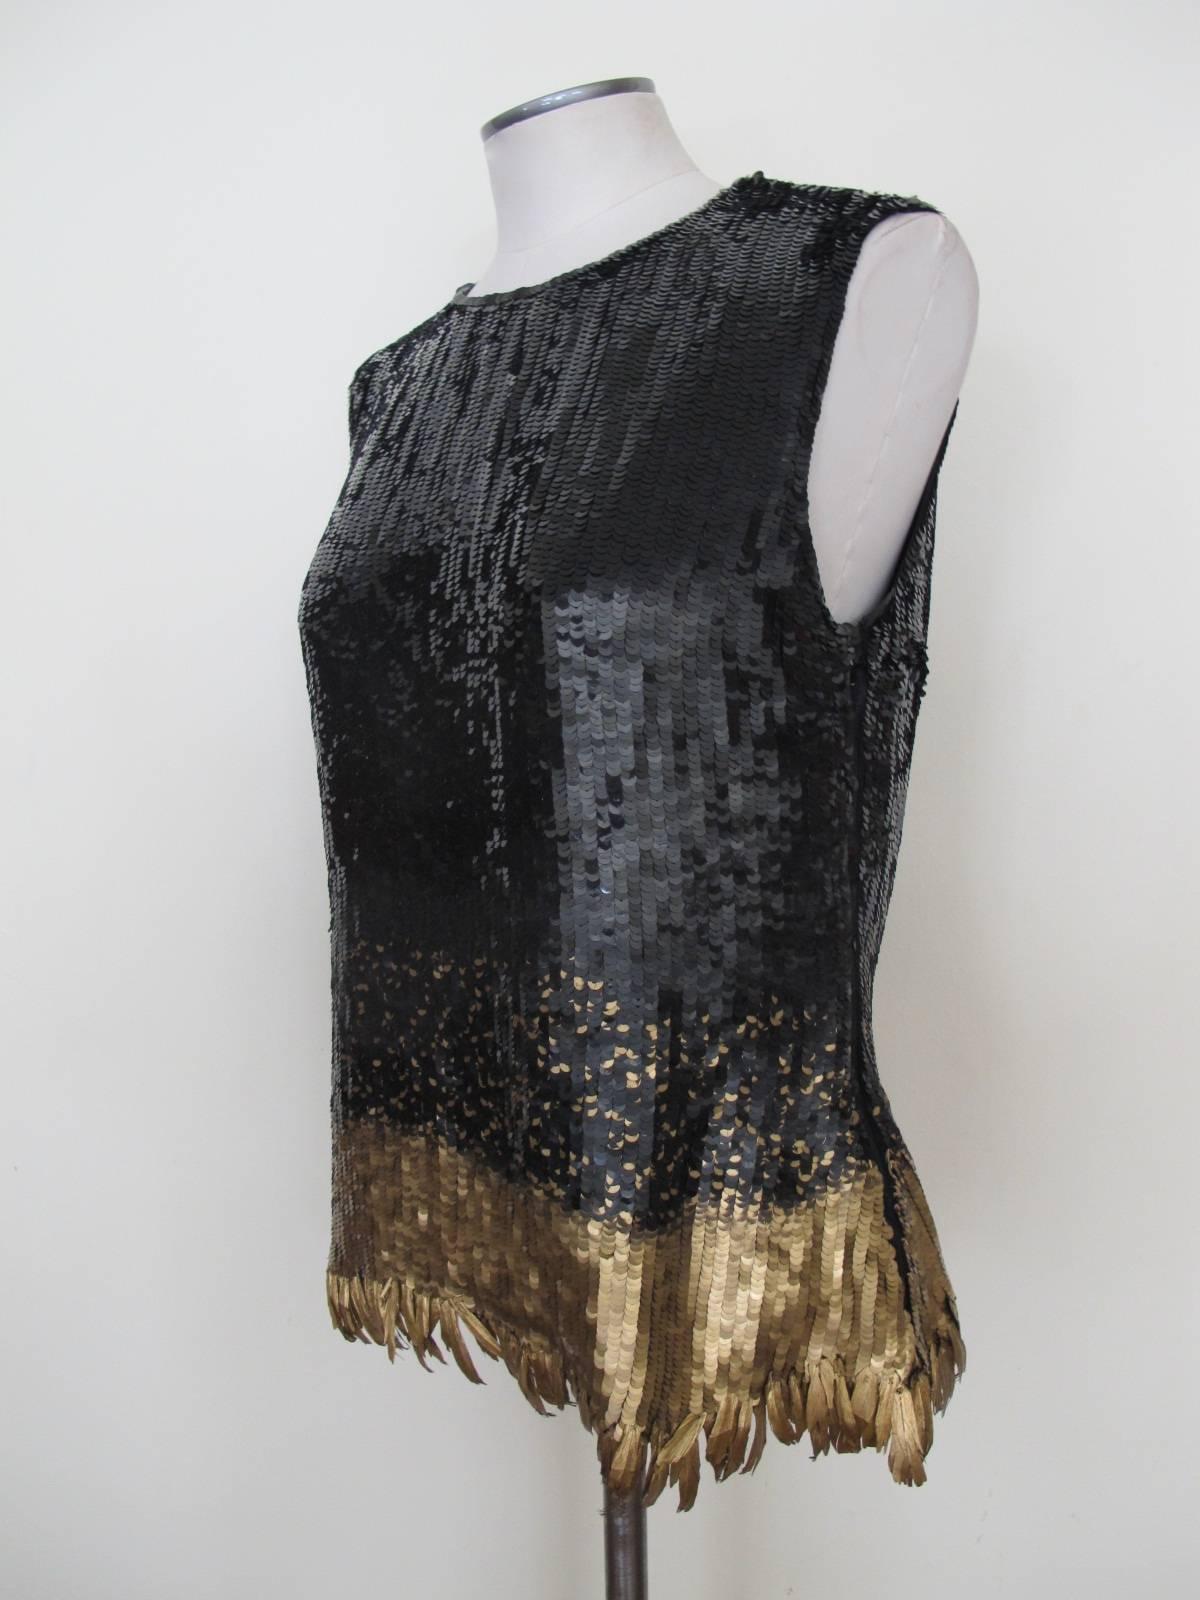 Elegant black sequin cocktail blouse from the waist down there are a mix of gold sequins cascading into three and a half inch panel of solid gold sequins. It is lined with black silk chiffon. The trim at the bottom are feathers that have been dipped